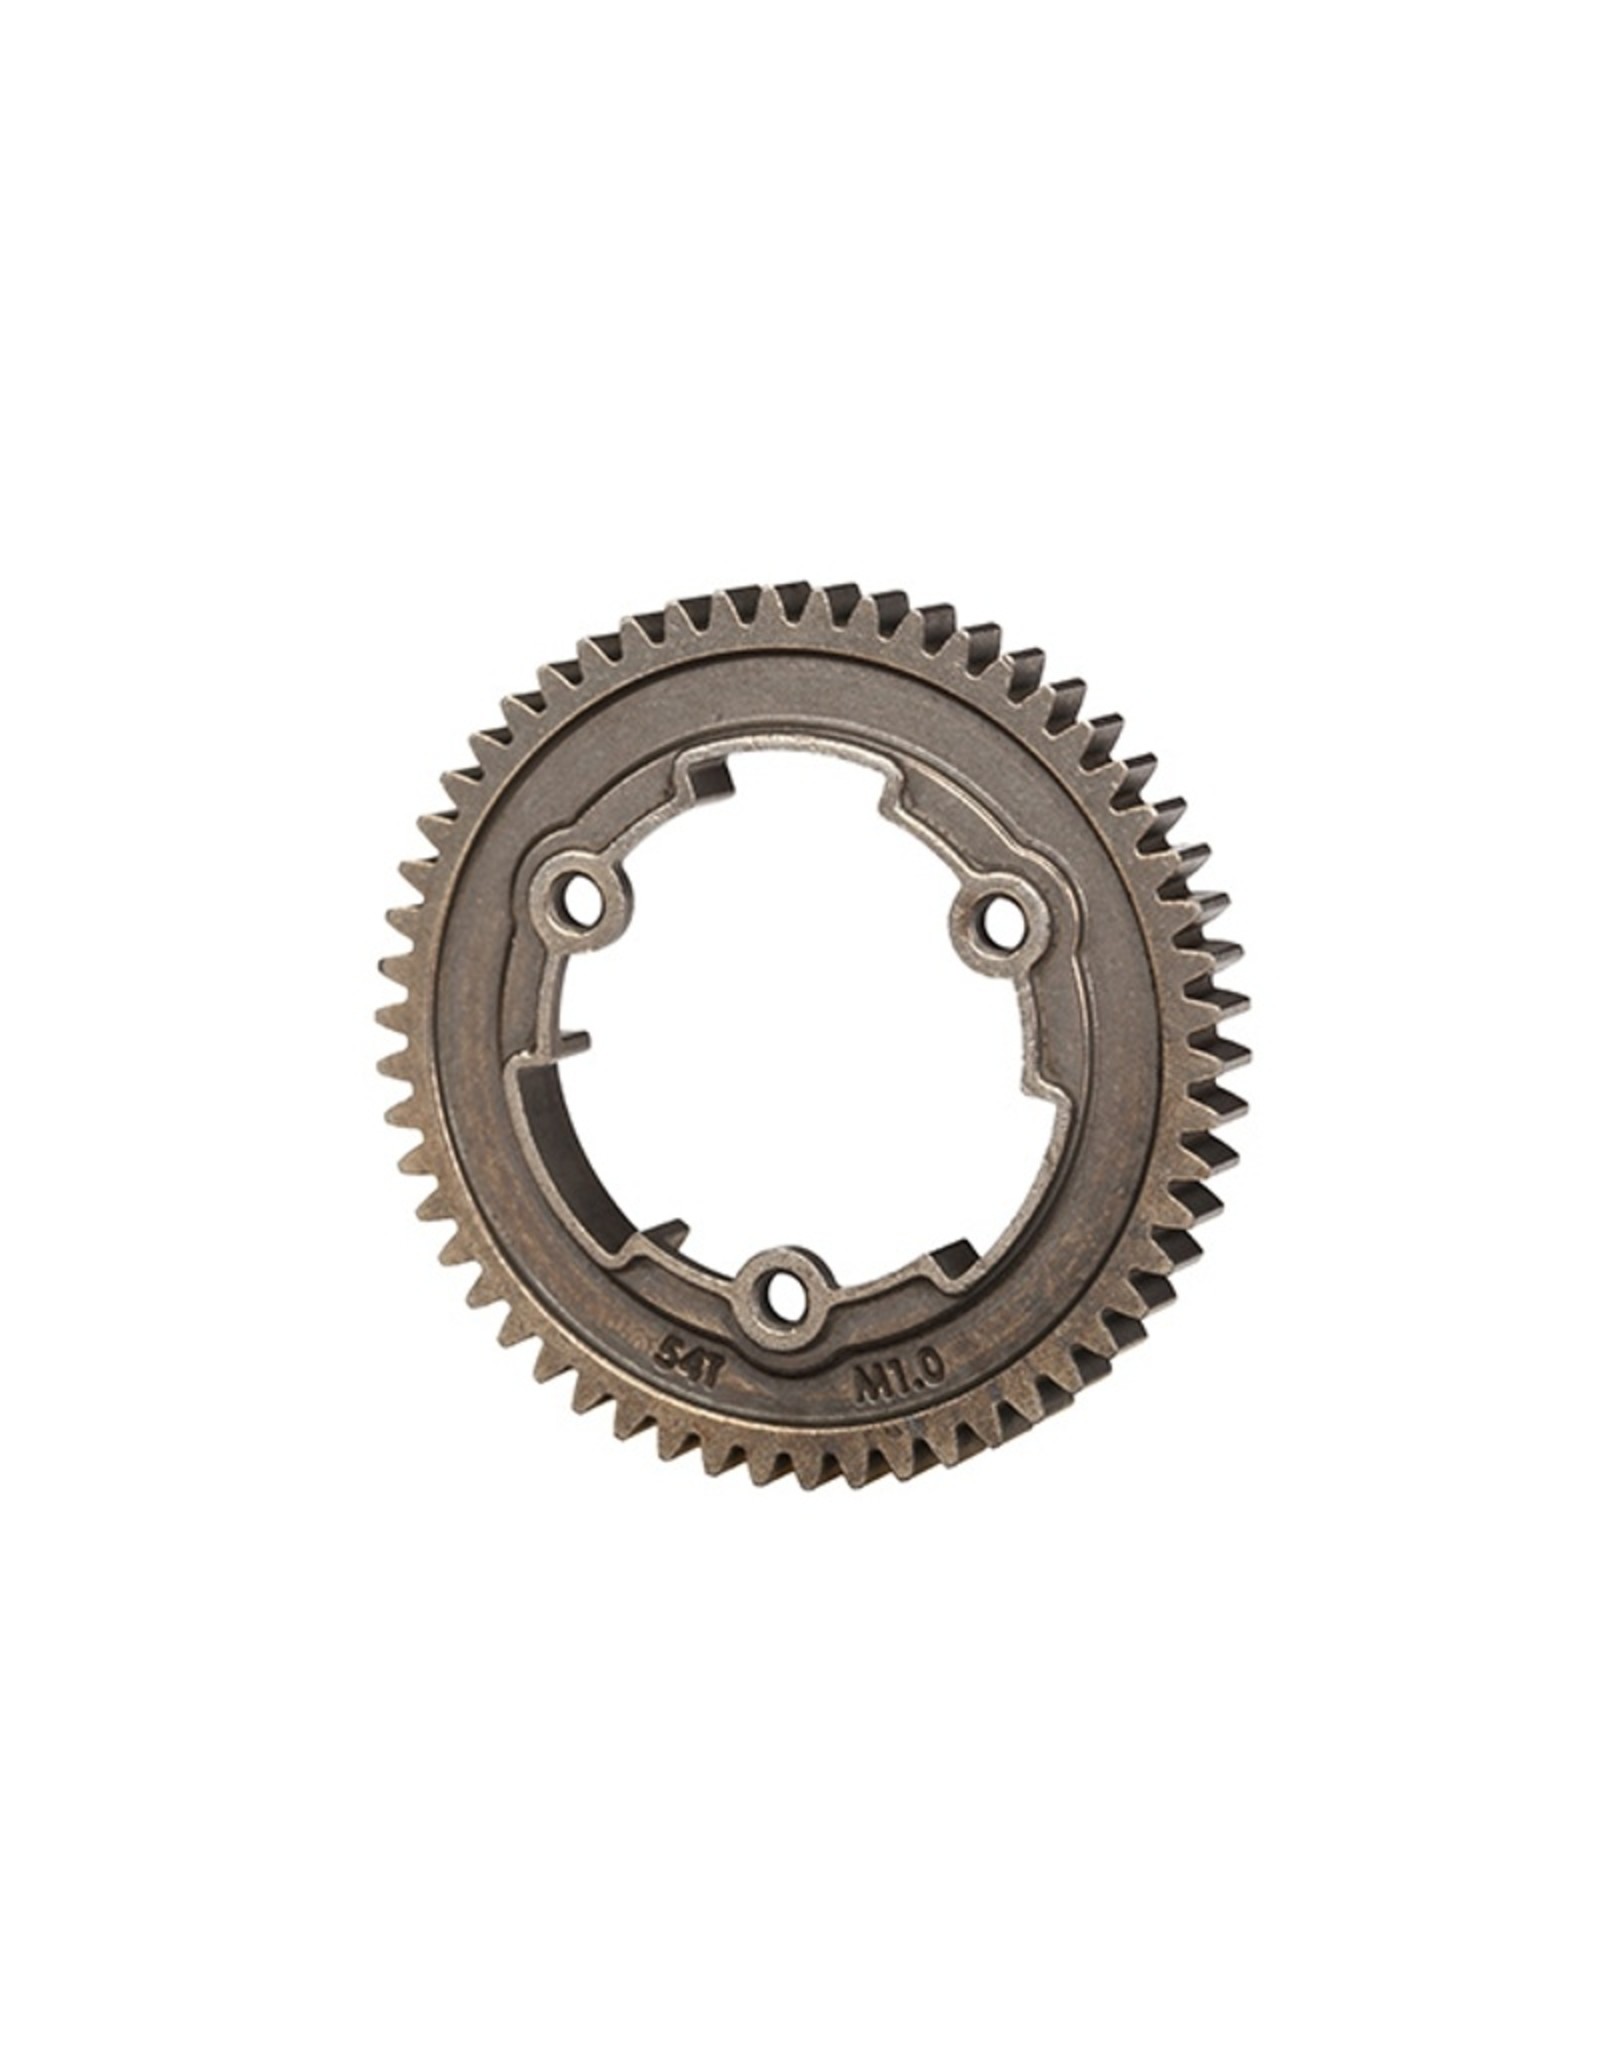 Traxxas TRA6449X  Spur gear, 54-tooth, steel (1.0 metric pitch)